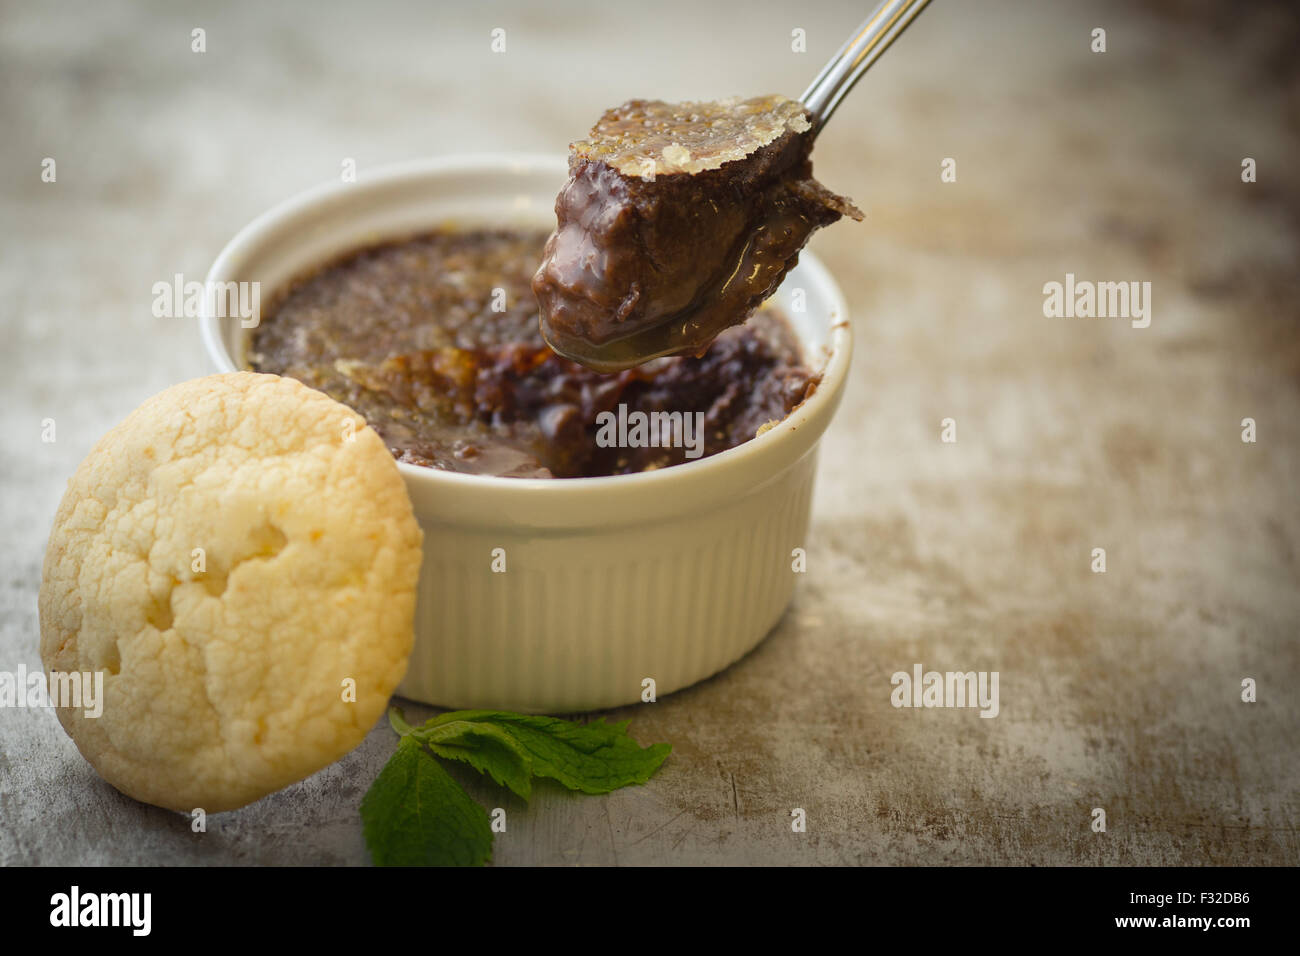 Pudding creme images and caramel Alamy hi-res stock 19 - - Page photography